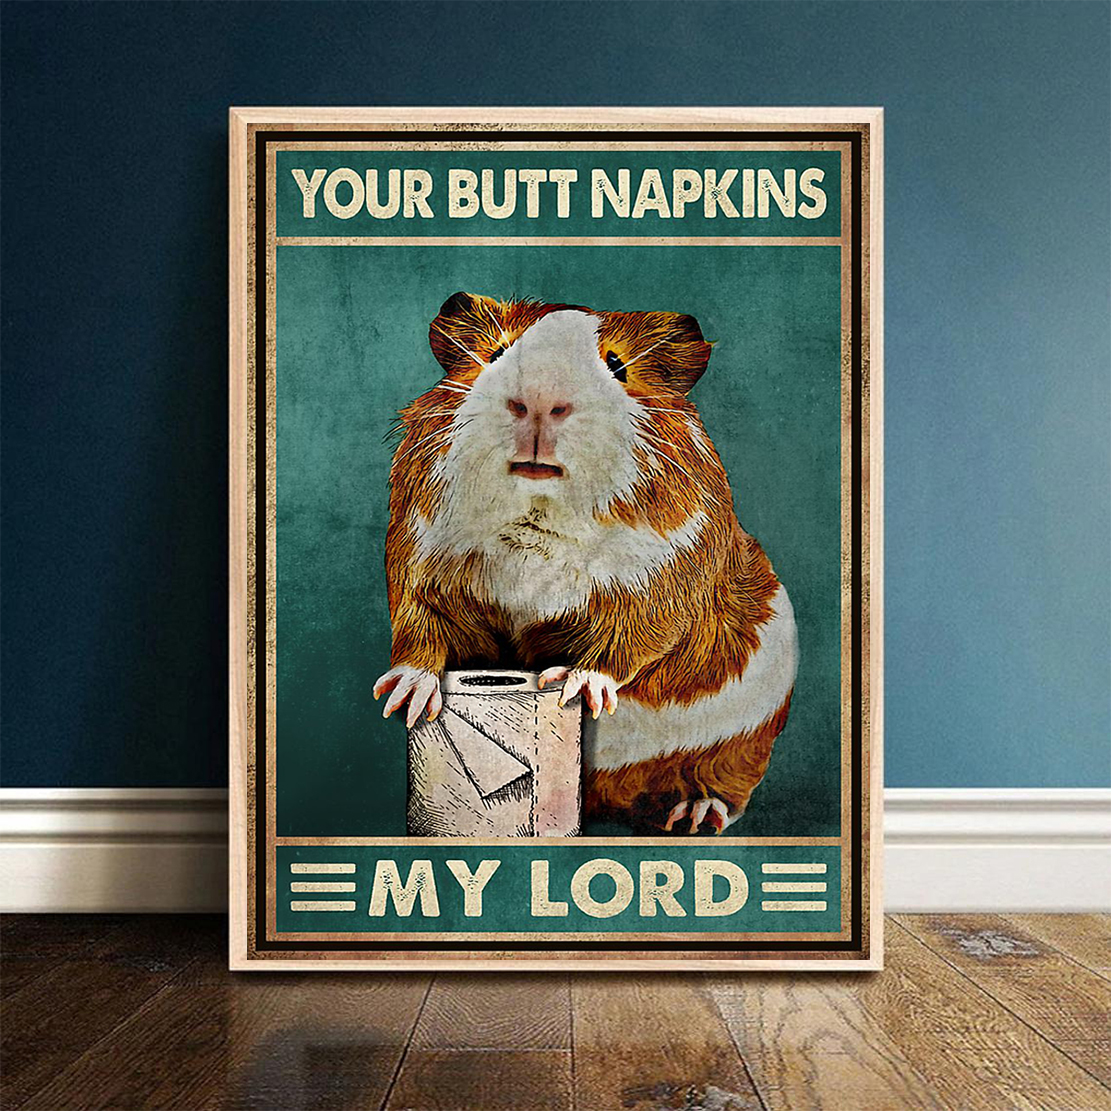 Hamster your butt napkins my lord poster